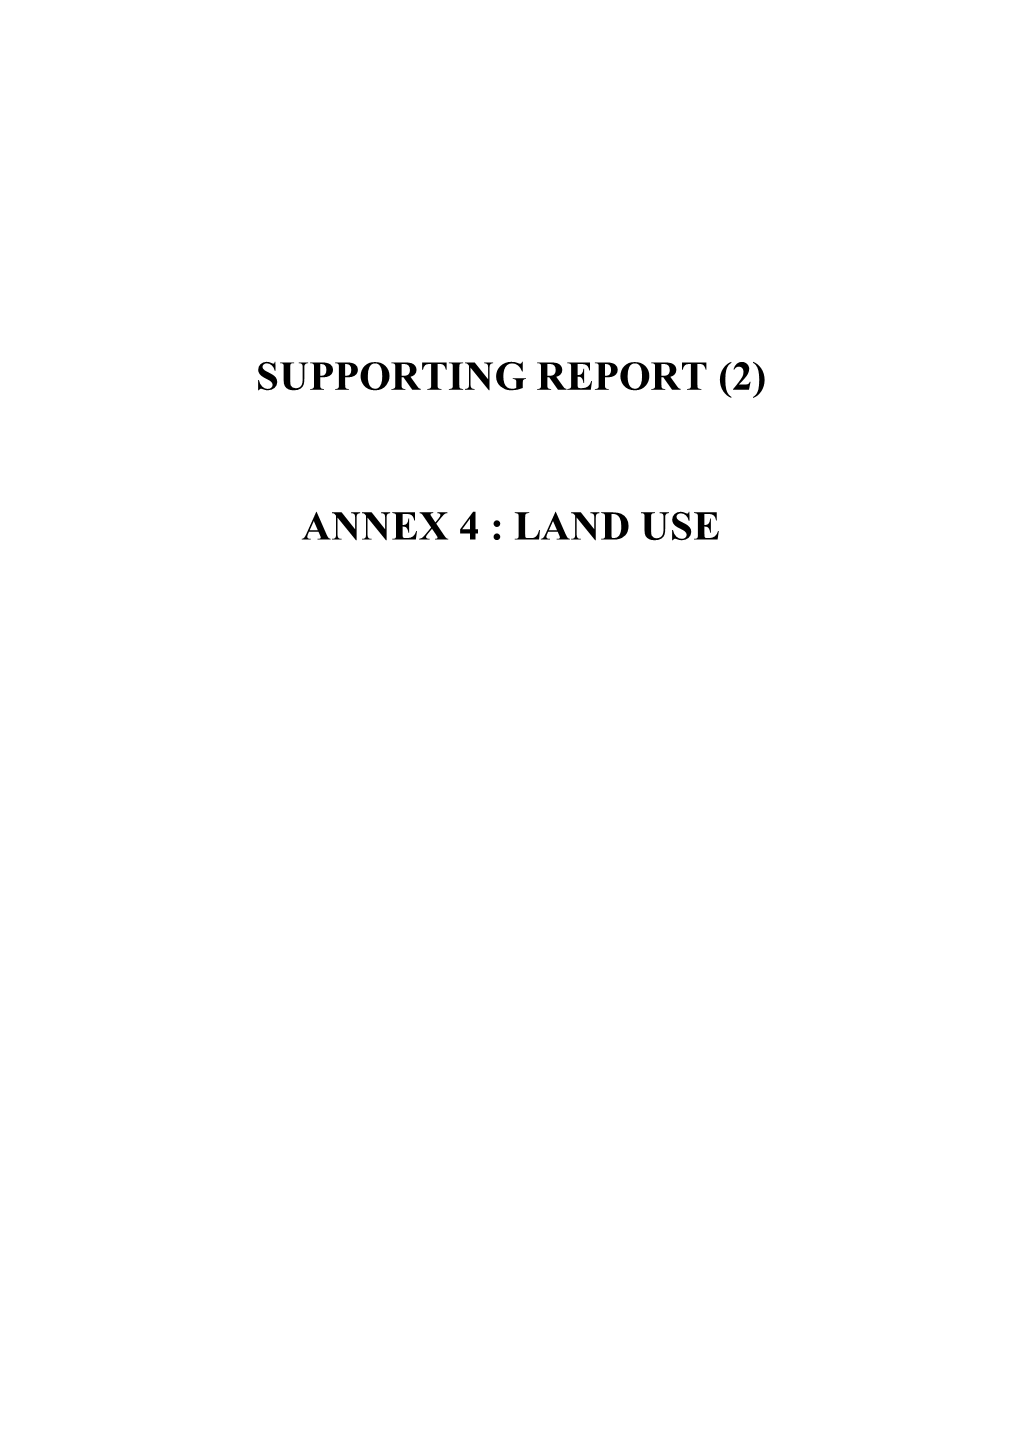 Supporting Report (2) Annex 4 : Land